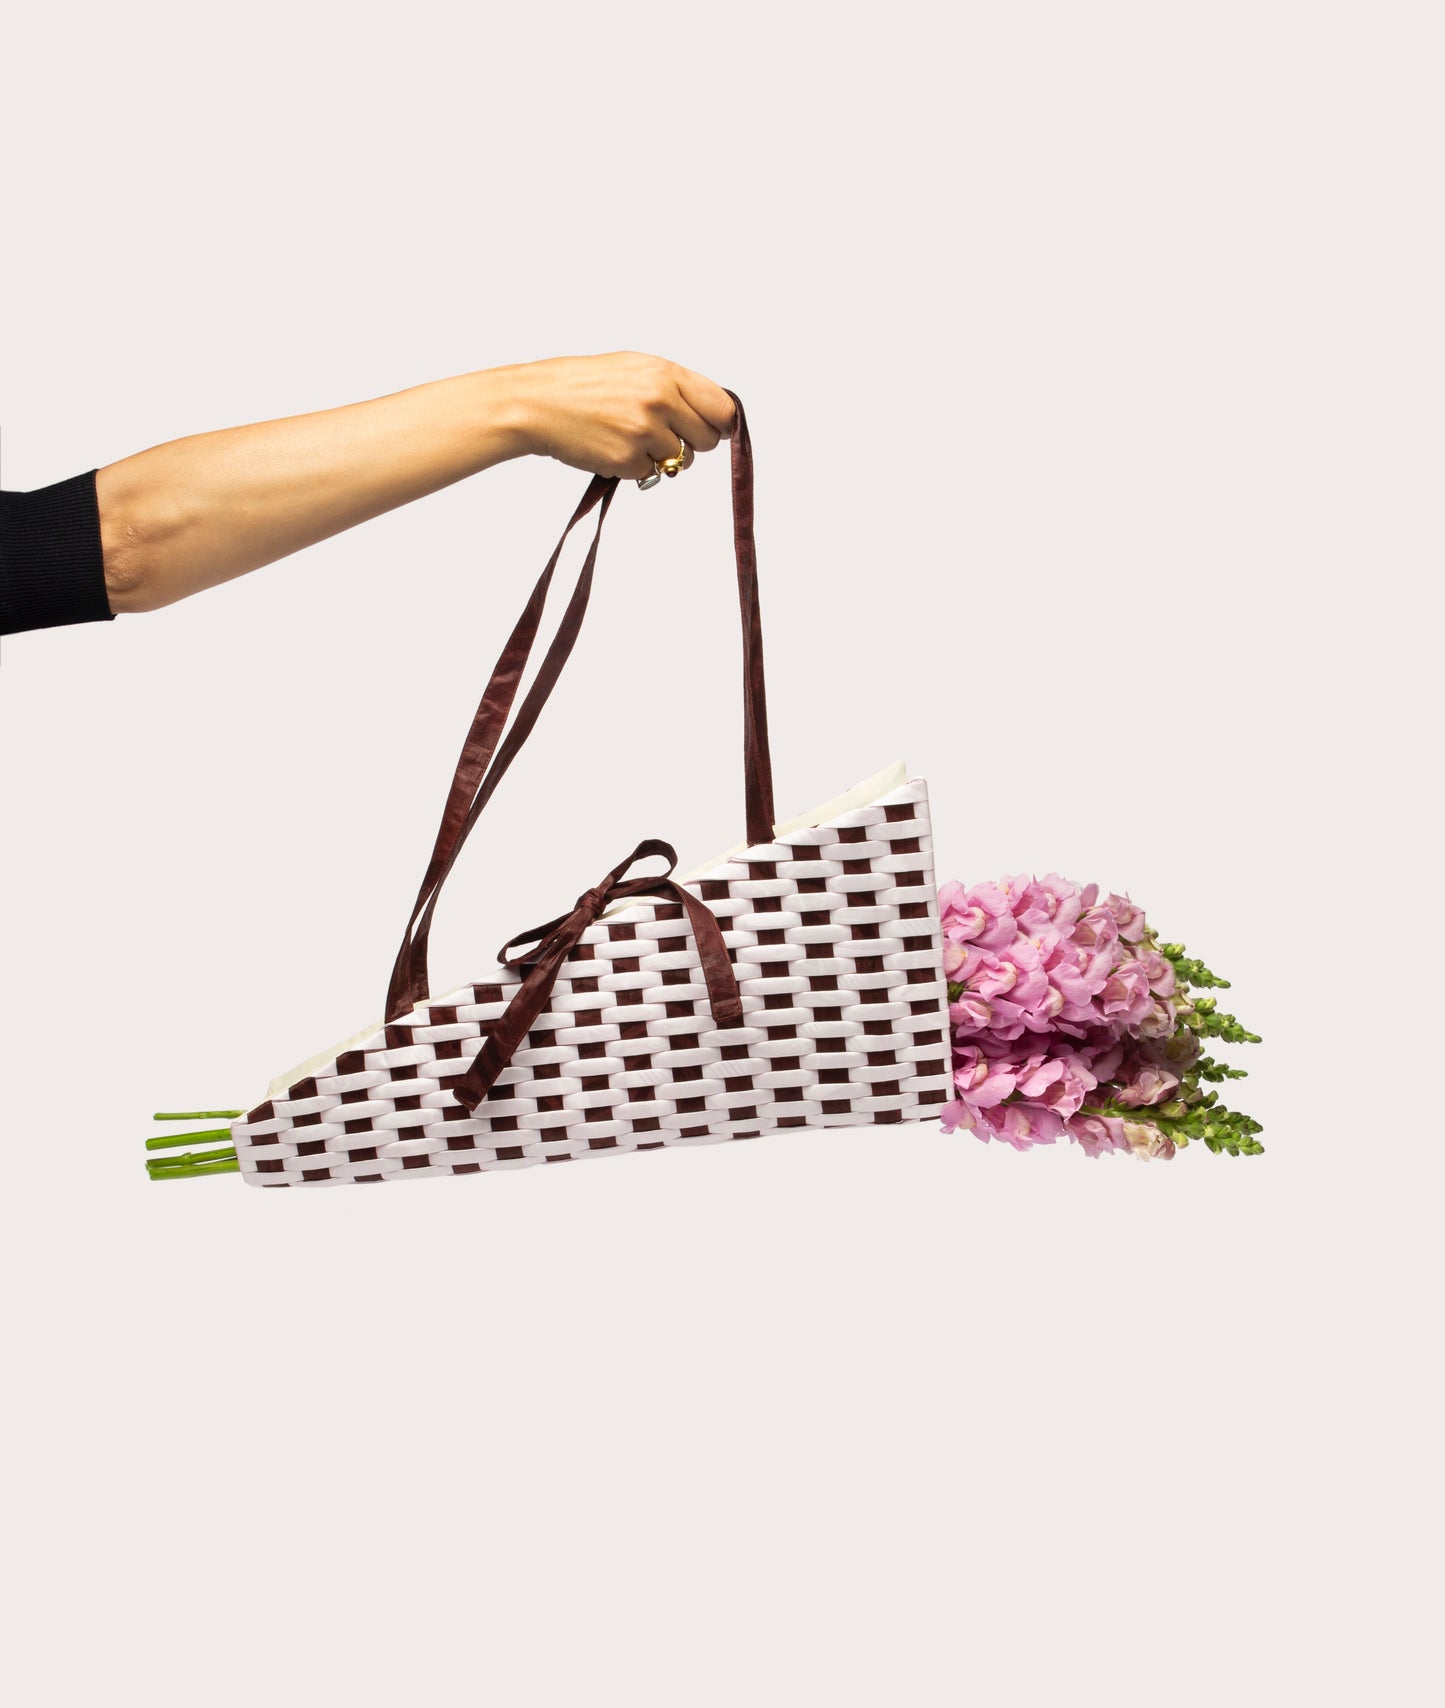 Gohar World and Super Yaya's Flower Bouquet Bags Are a Stylish, Summery  Treat